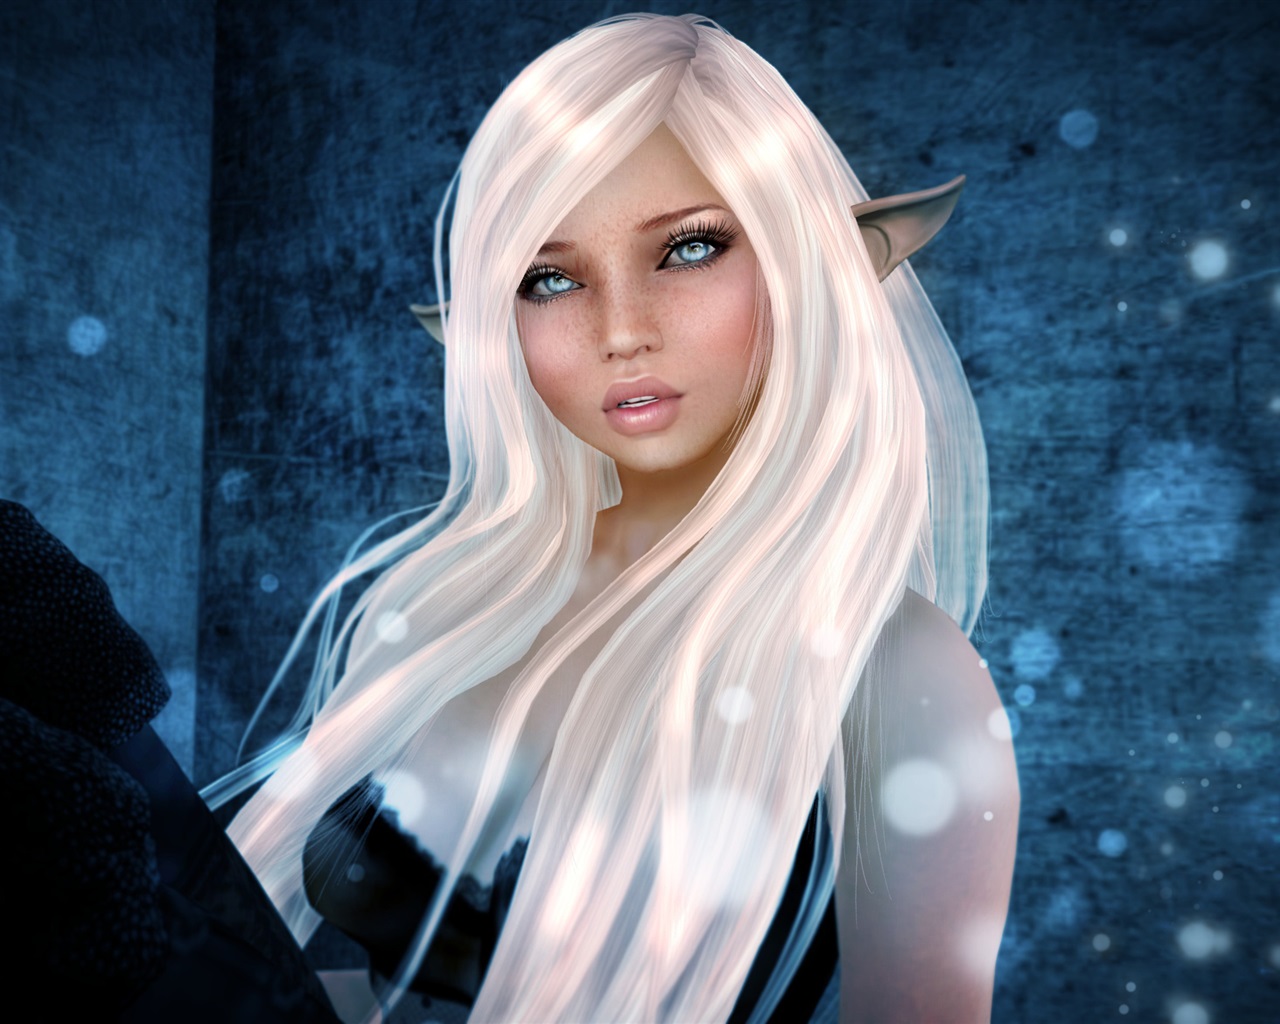 2. How to Achieve the Perfect White Blonde Hair for Your Elf Character - wide 3